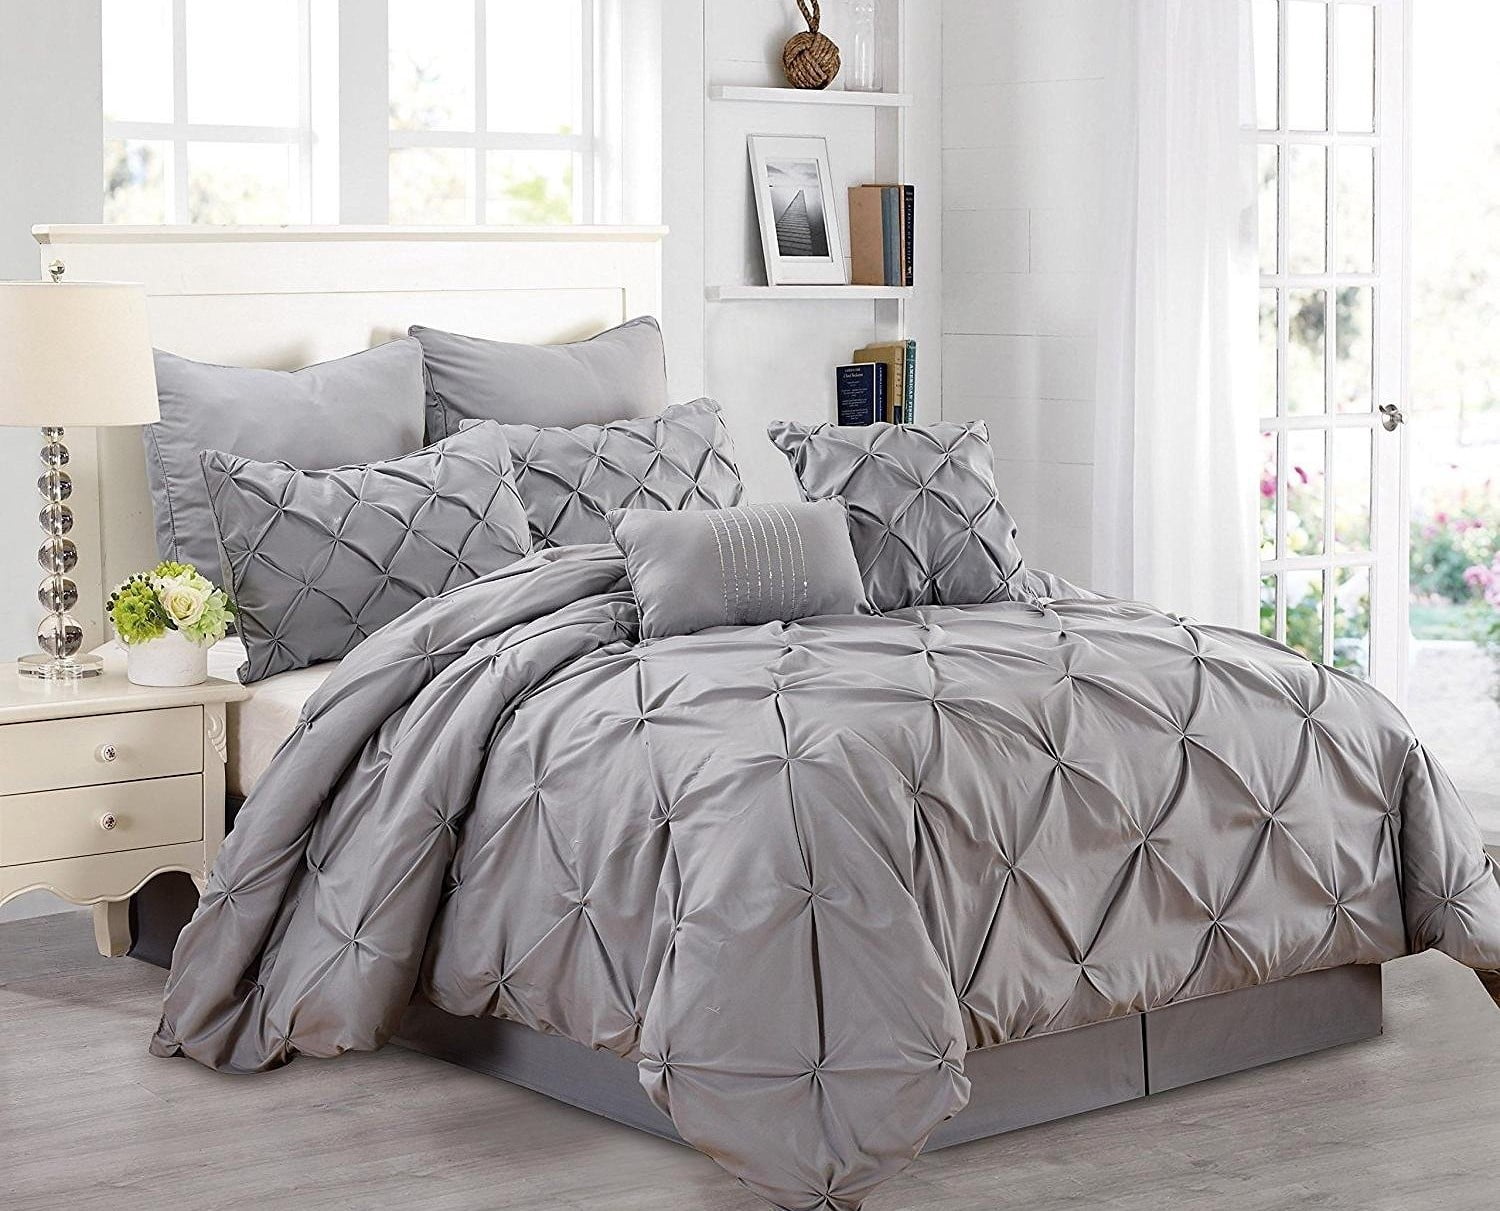 Details about   Chic Home Louisville 7 Piece Reversible Comforter Bag Ruffled Pinch Pleat Geomet 